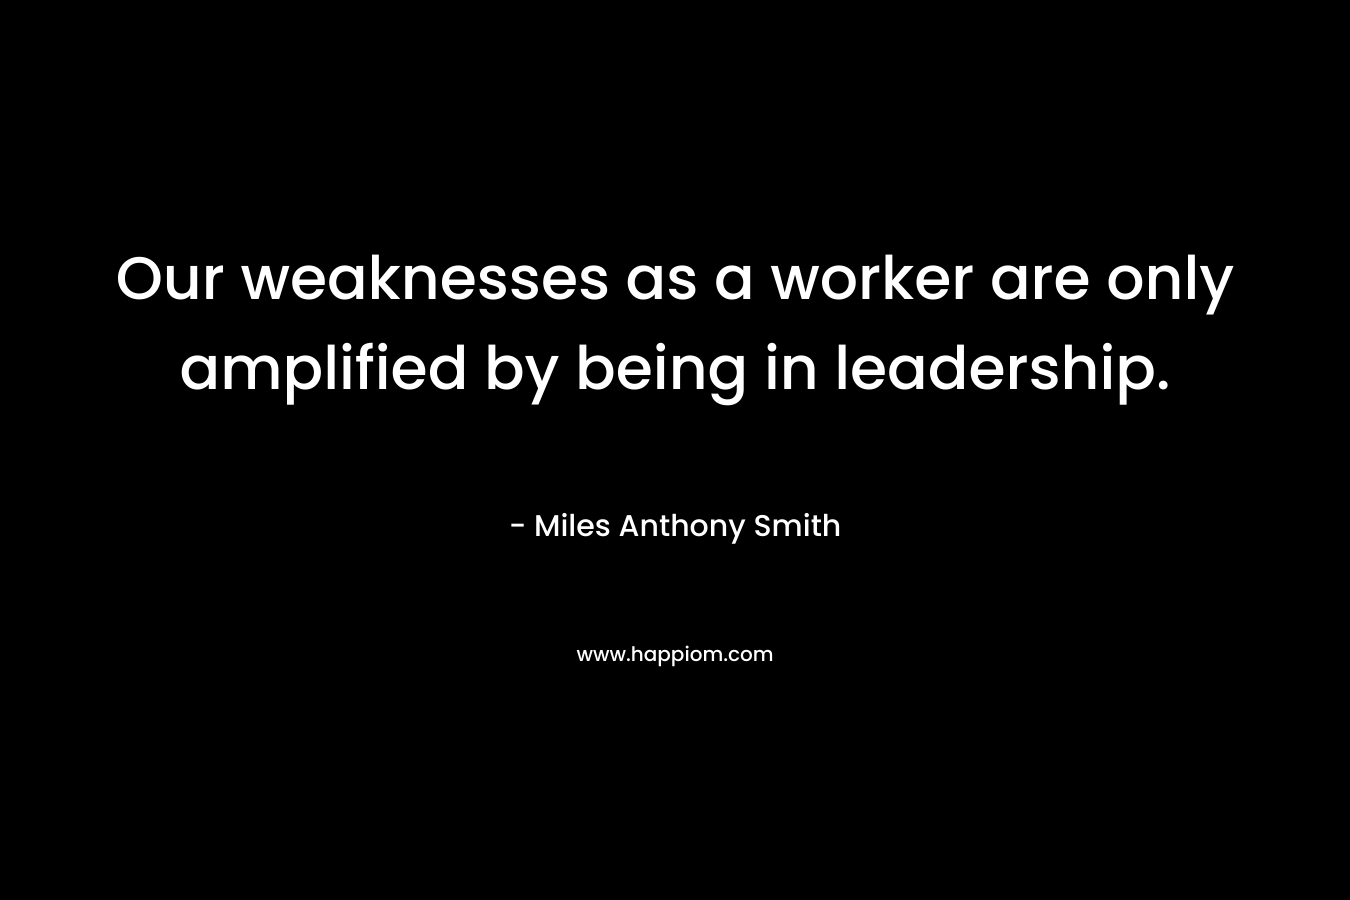 Our weaknesses as a worker are only amplified by being in leadership. – Miles Anthony Smith